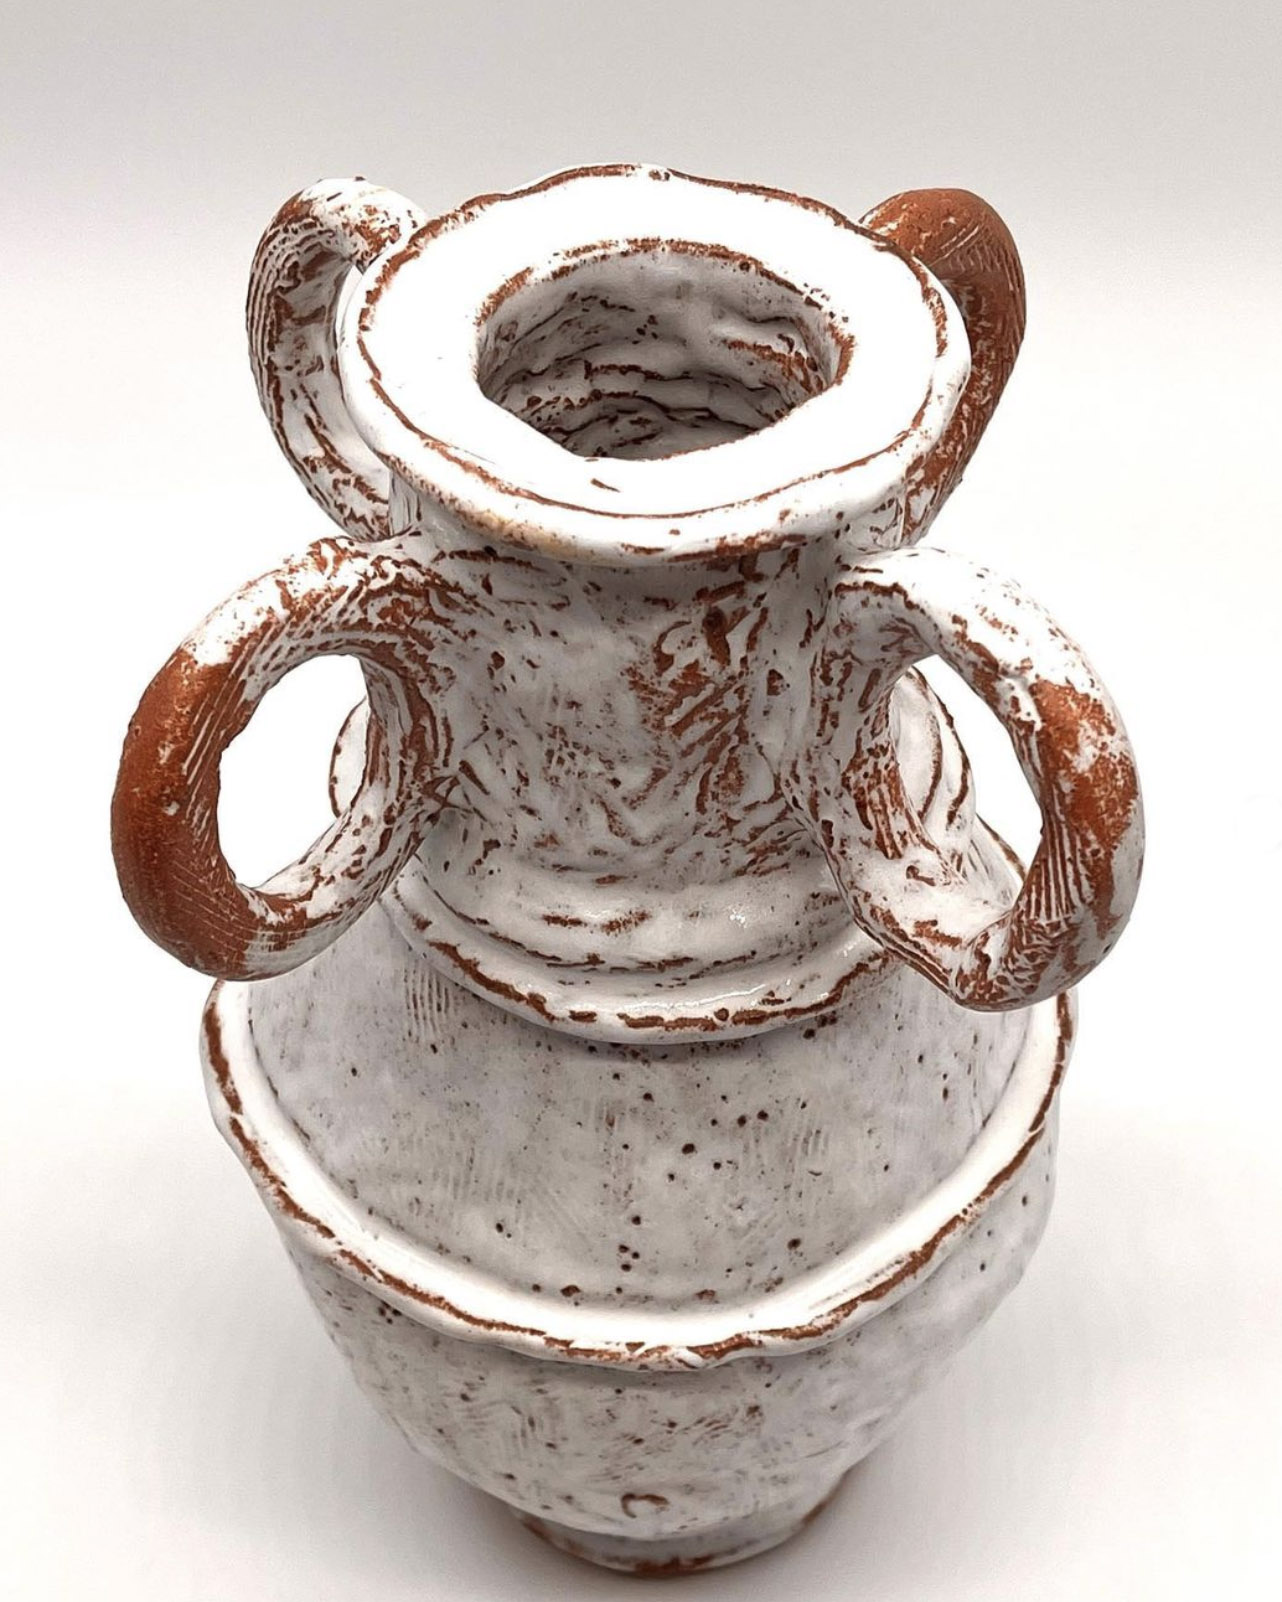 Coil method vase with BTC glaze 12" x 8" x 7" | $350 Click for full view